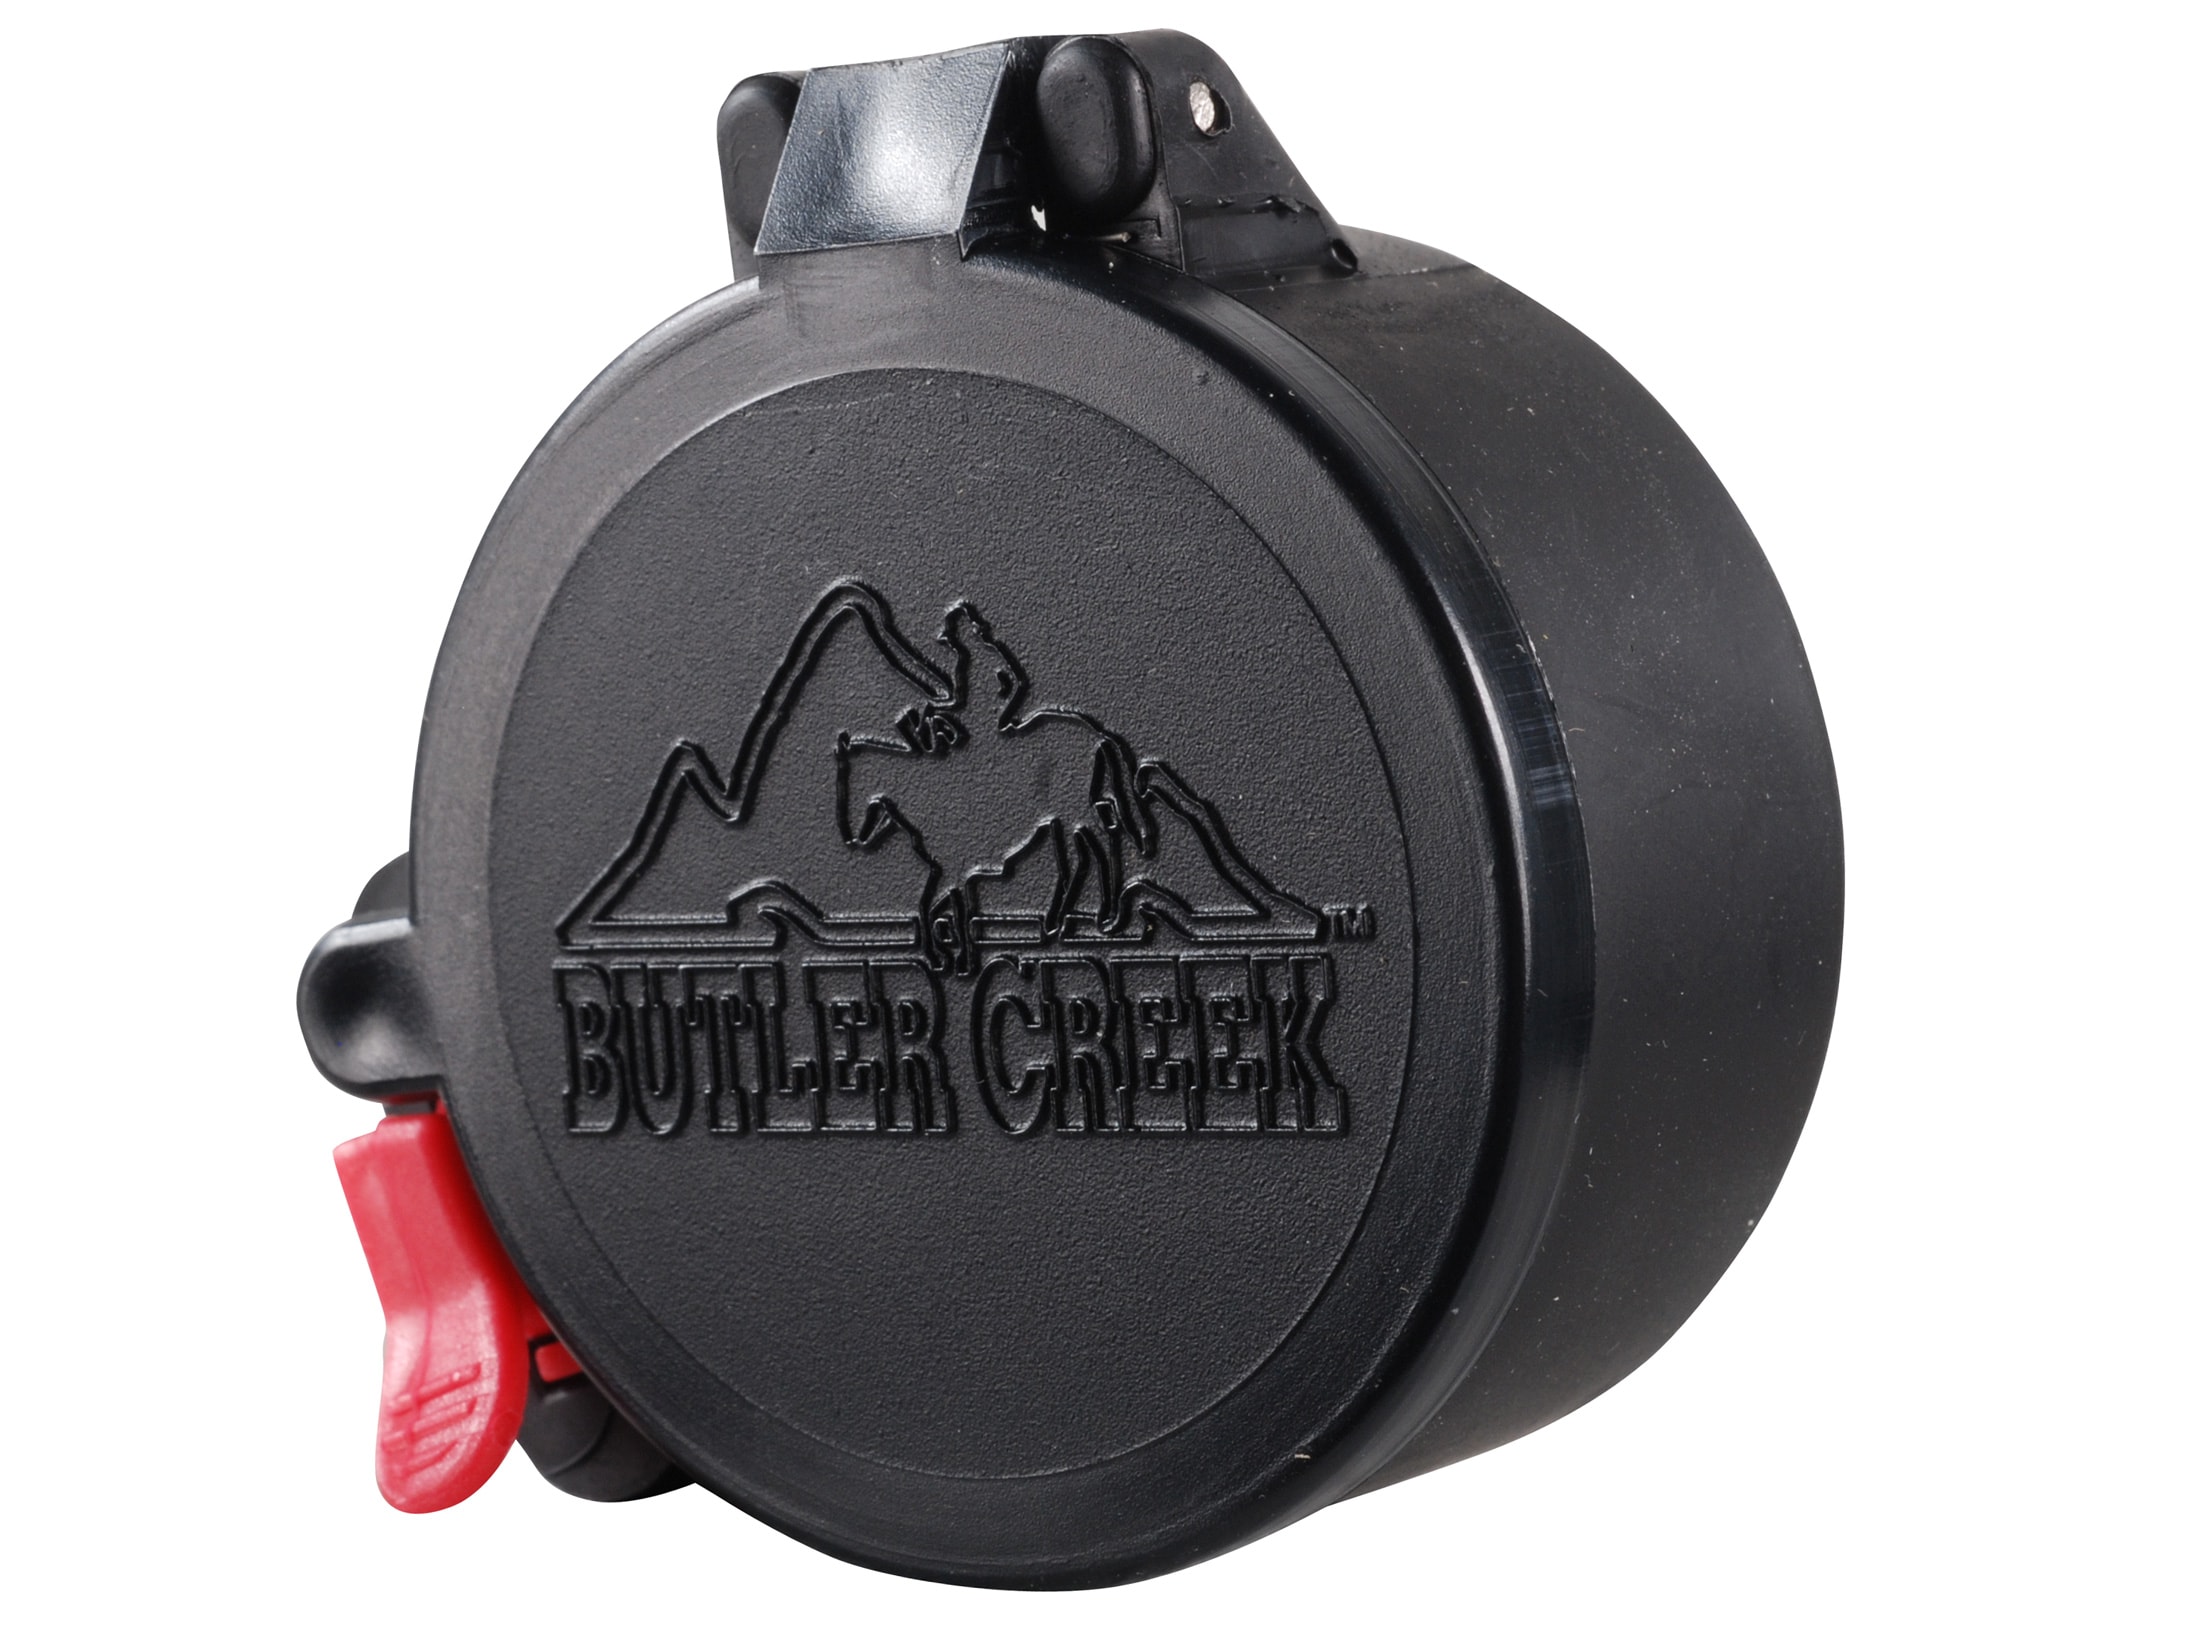 Butler Creek Scope Cover Chart By Brand